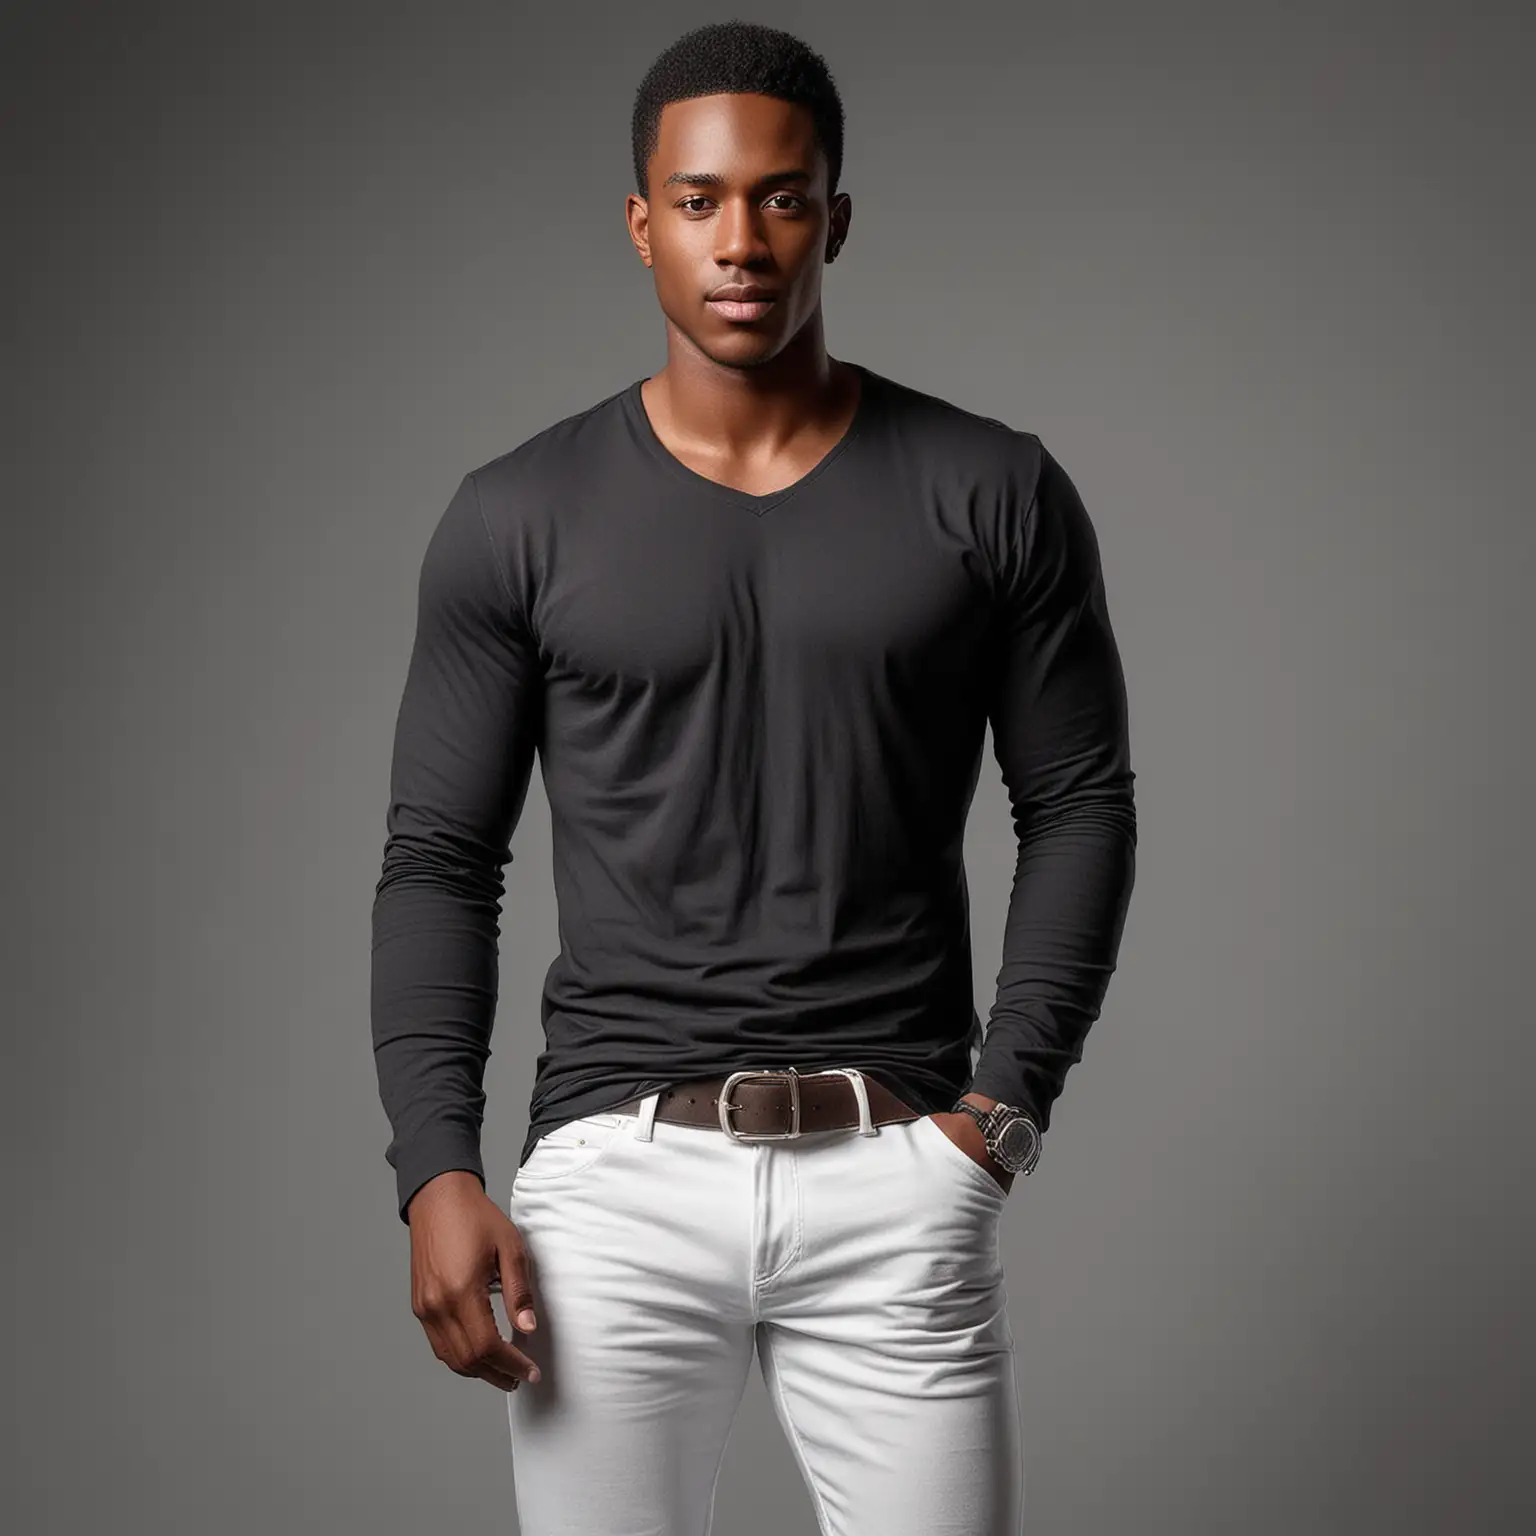 generate hyper  realistic handsome fair skin Bahamian male model wearing white pants with the black long sleeve tshirt he is in a studio